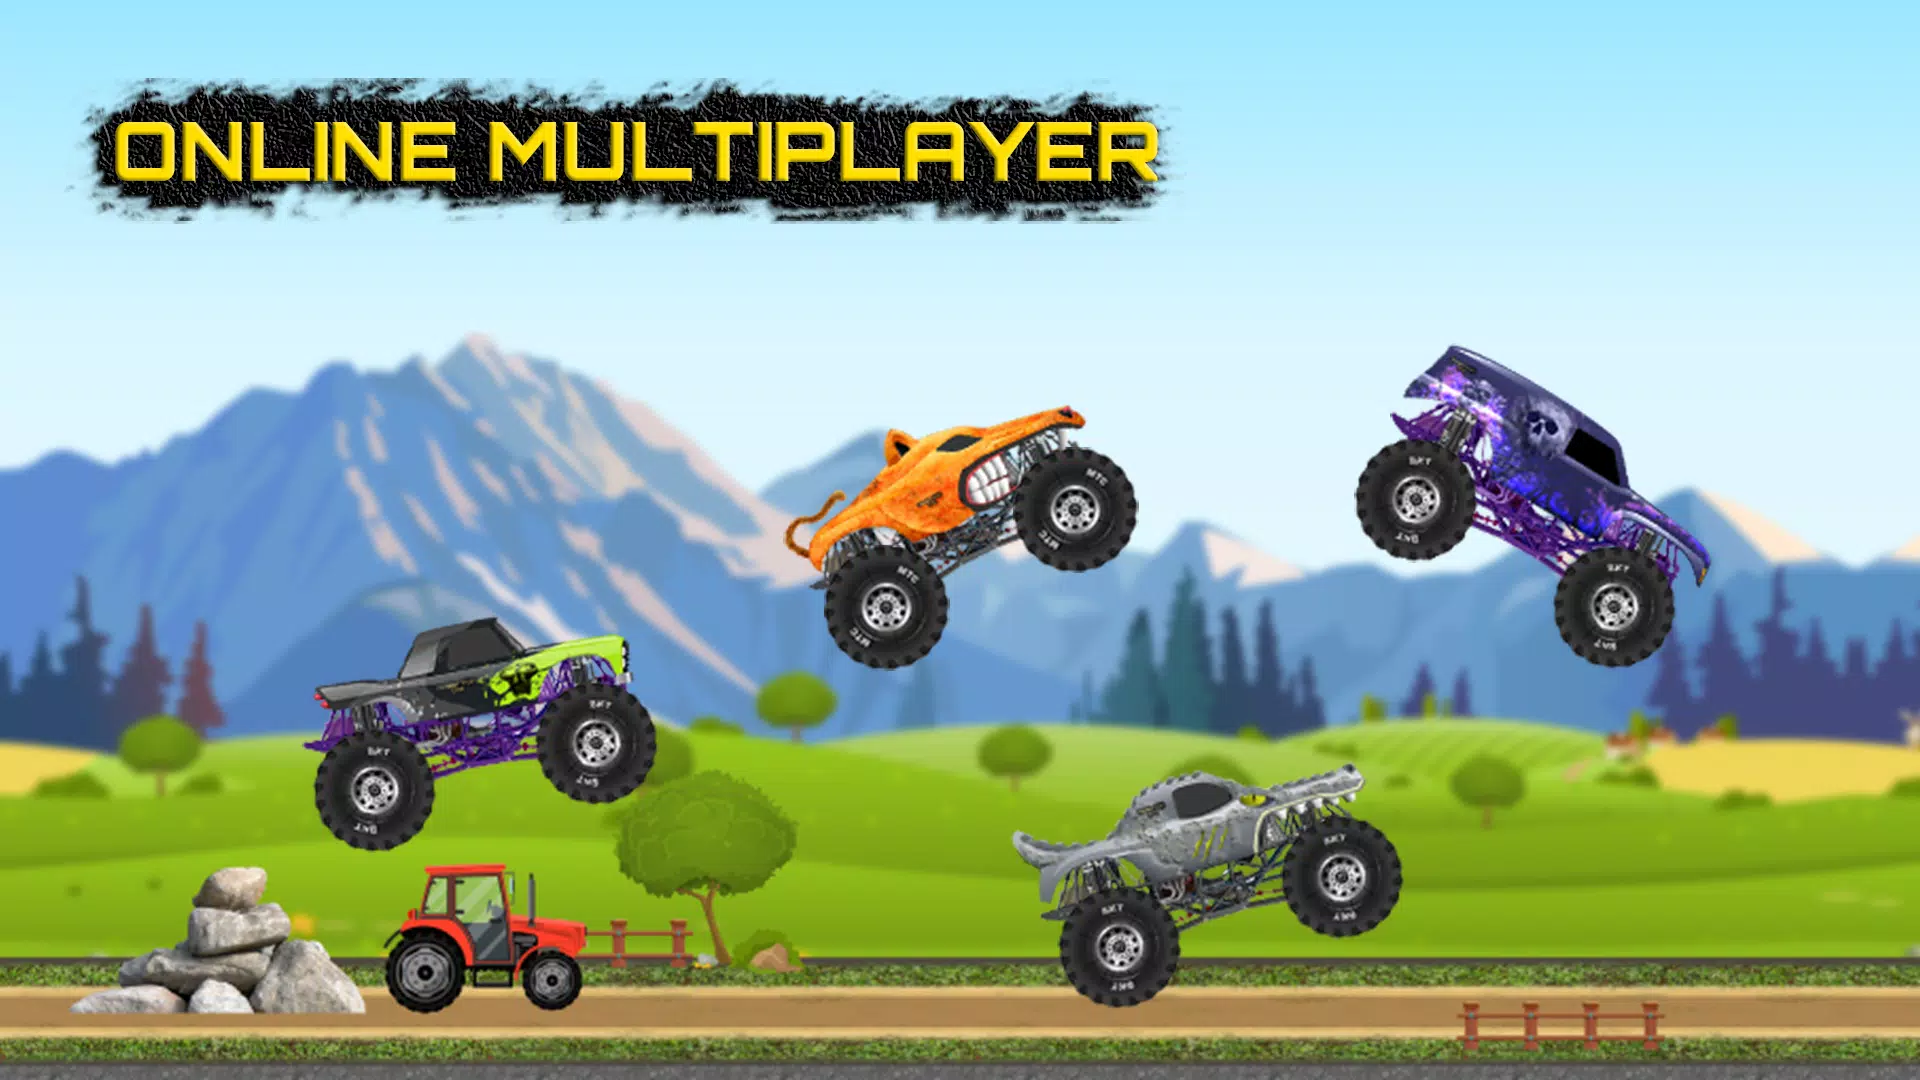 Ultimate Racing: Monster Truck android iOS apk download for free